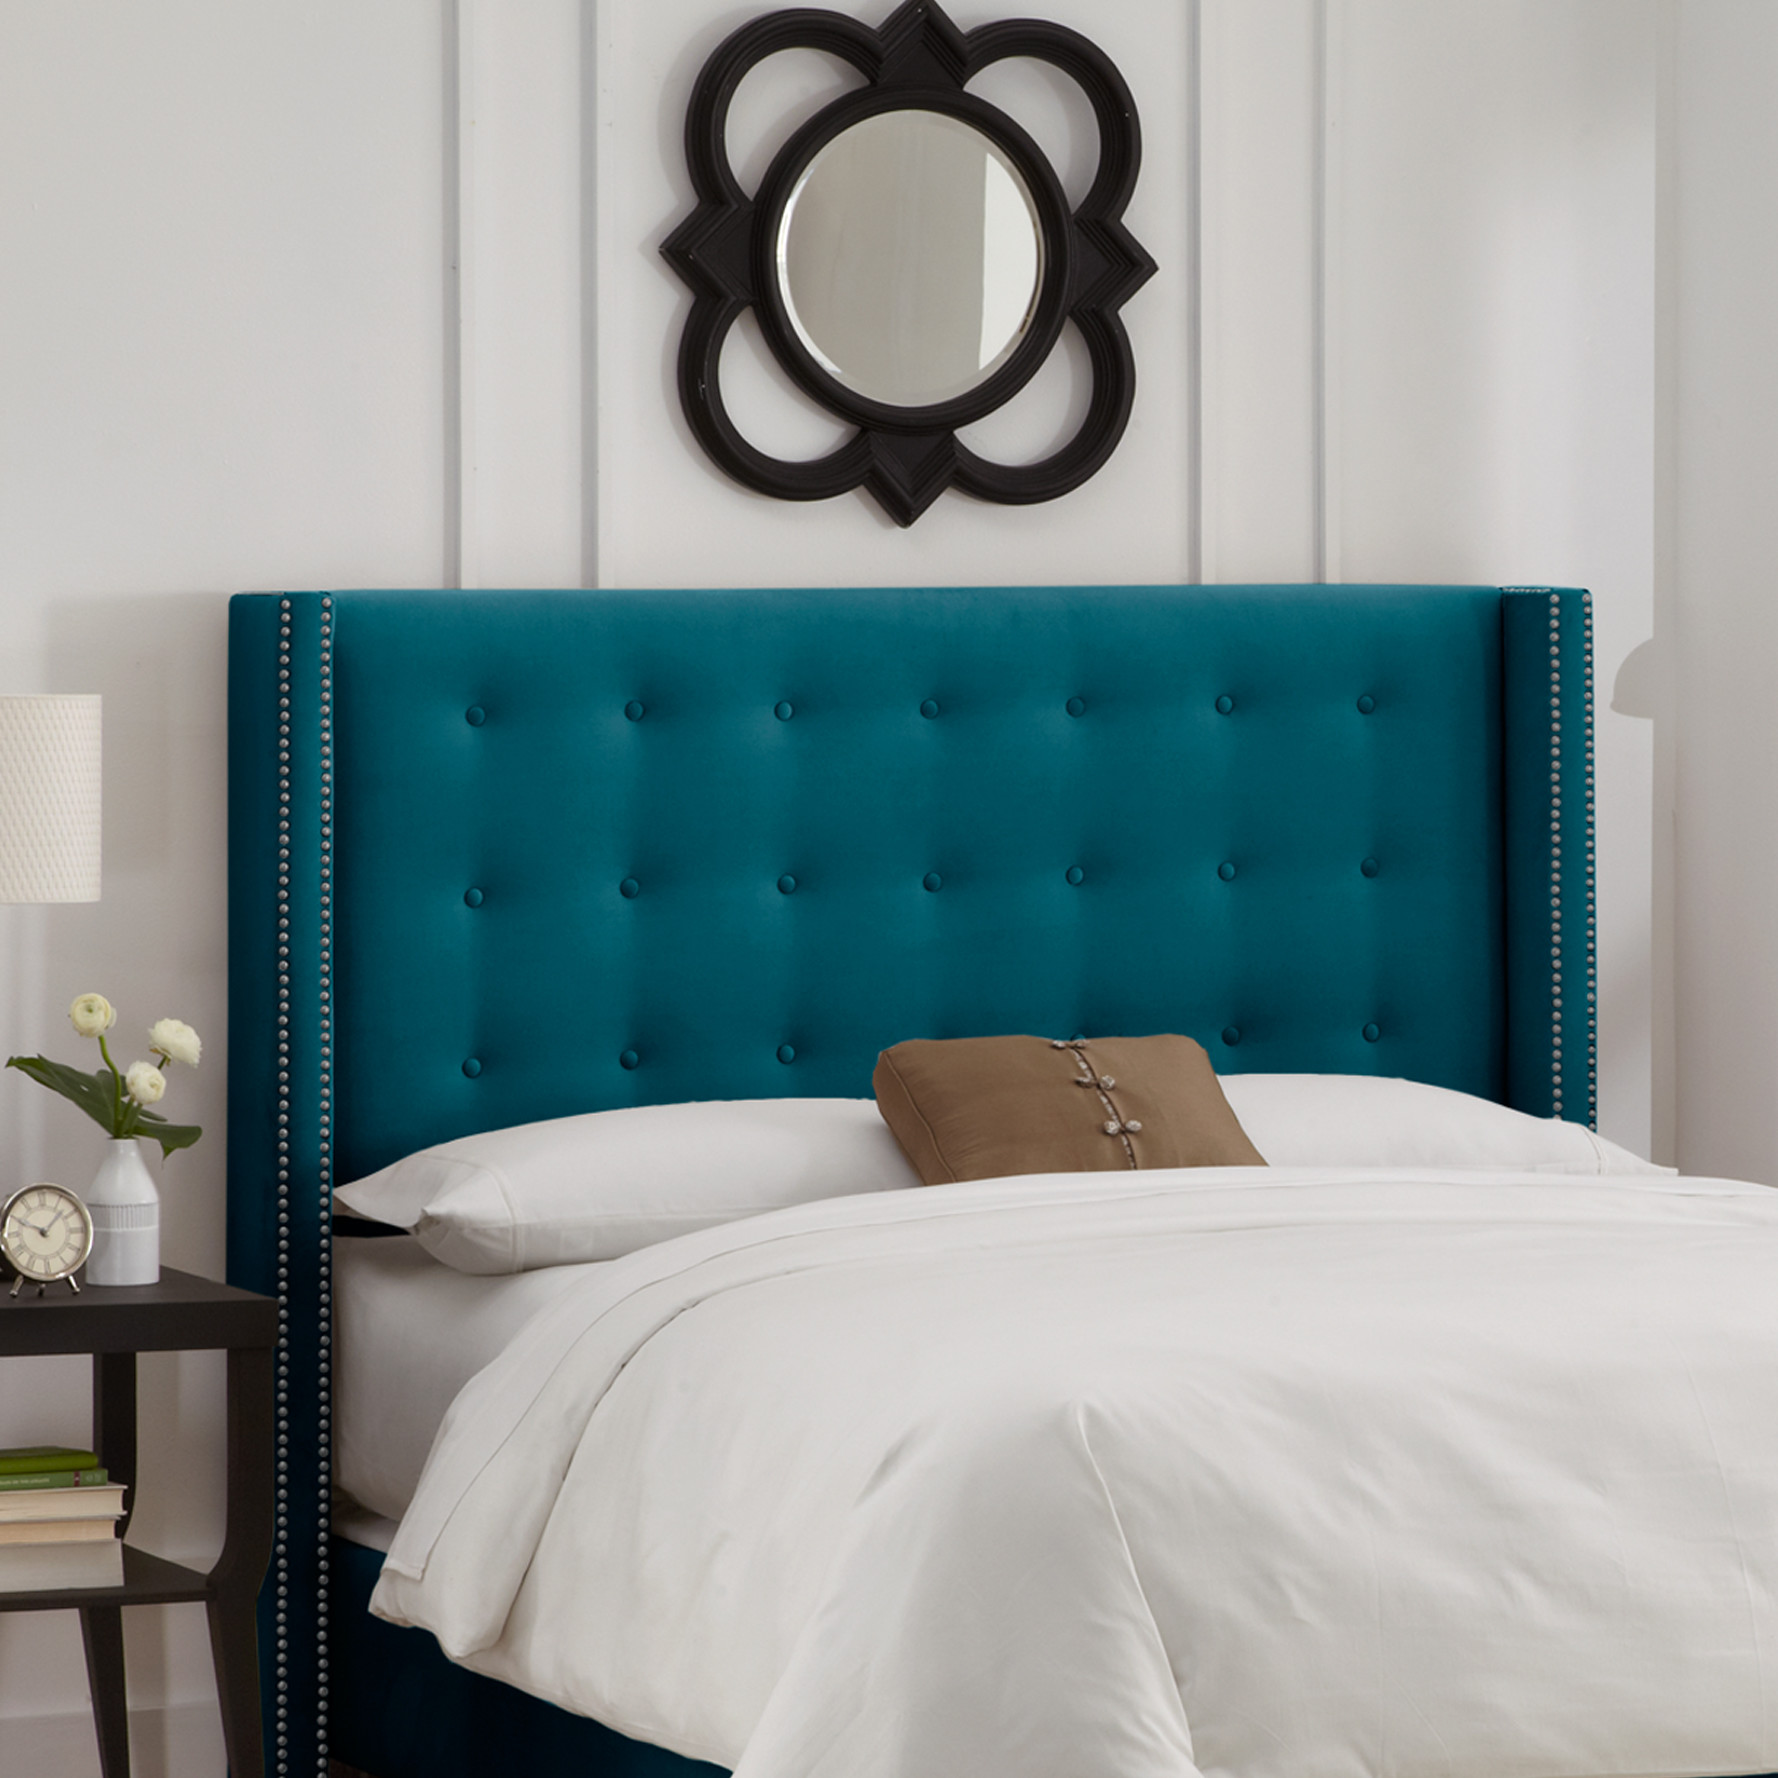 Beds and Headboards | Everything Turquoise